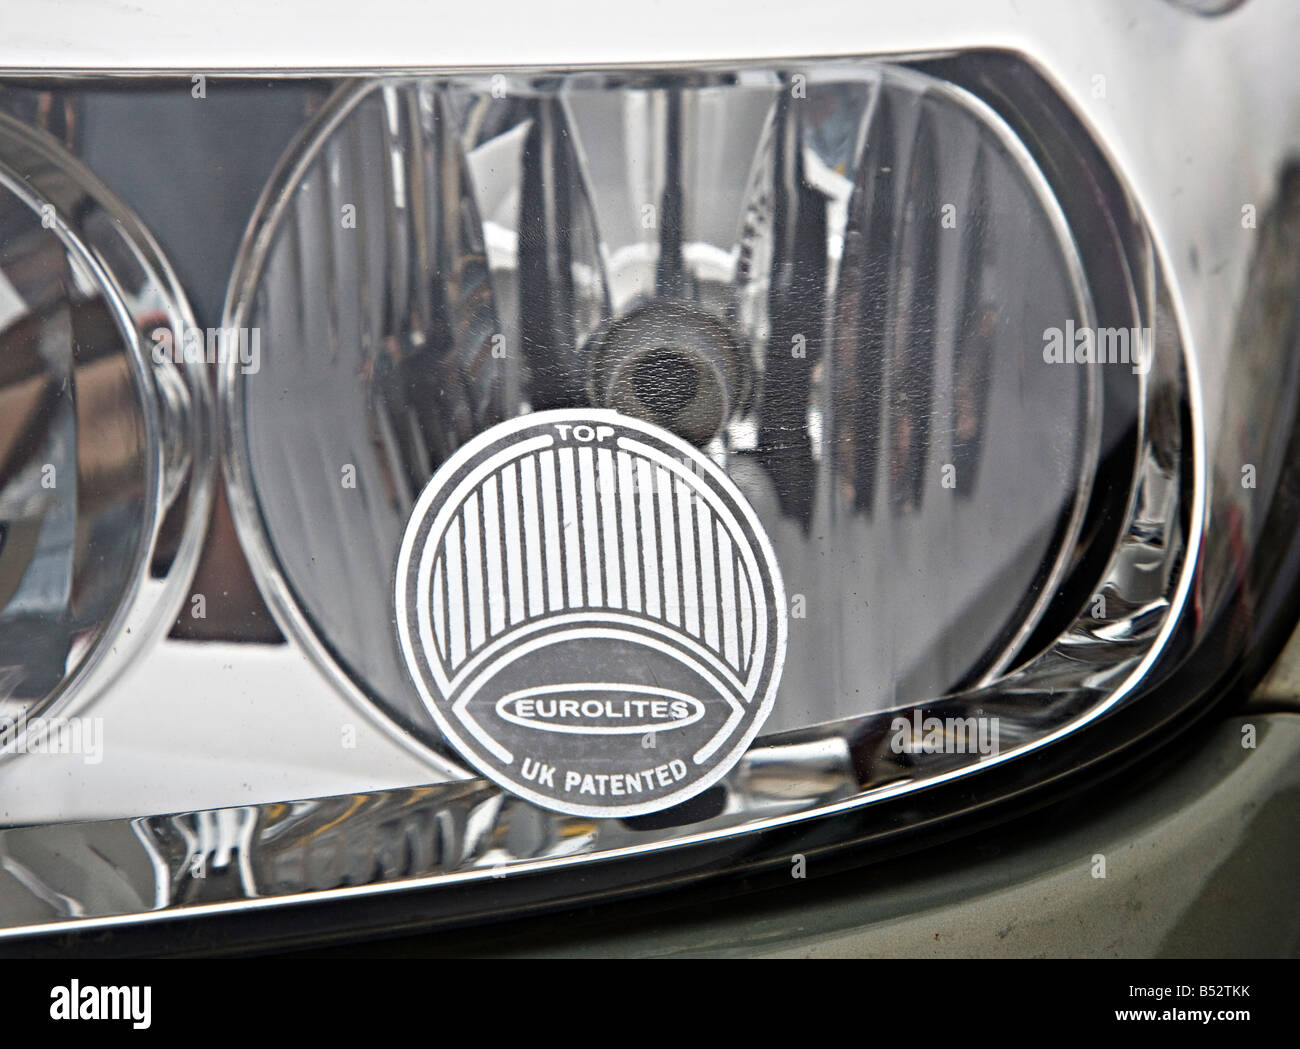 Beam deflector on car headlight ready for driving on the right in Europe UK Stock Photo